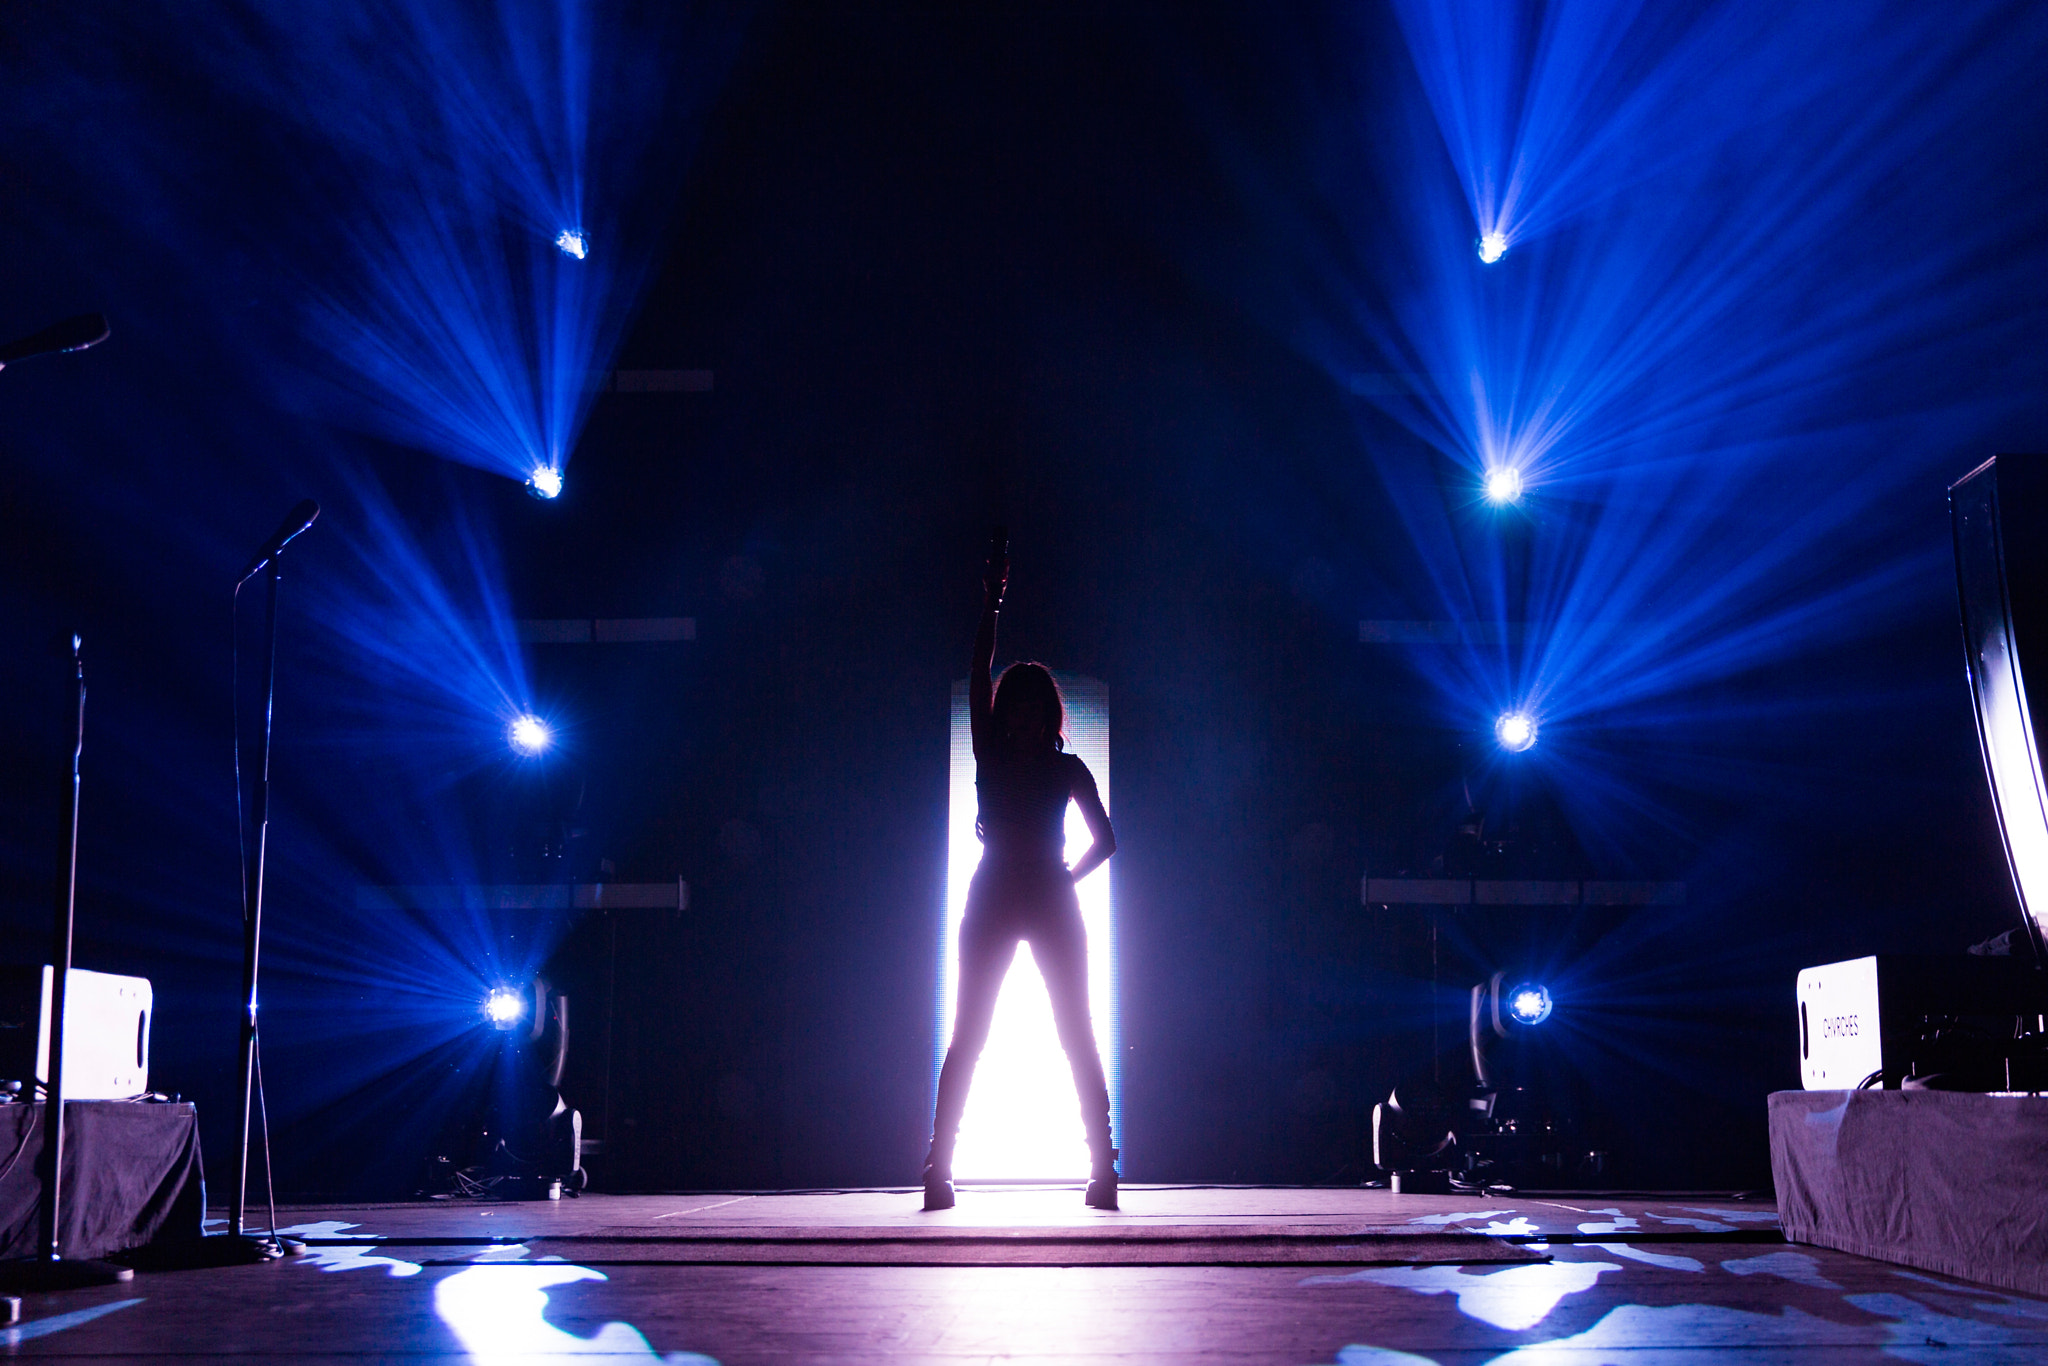 People 2048x1366 concerts silhouette Lauren Mayberry Chvrches stages stage shots stage light singer musician